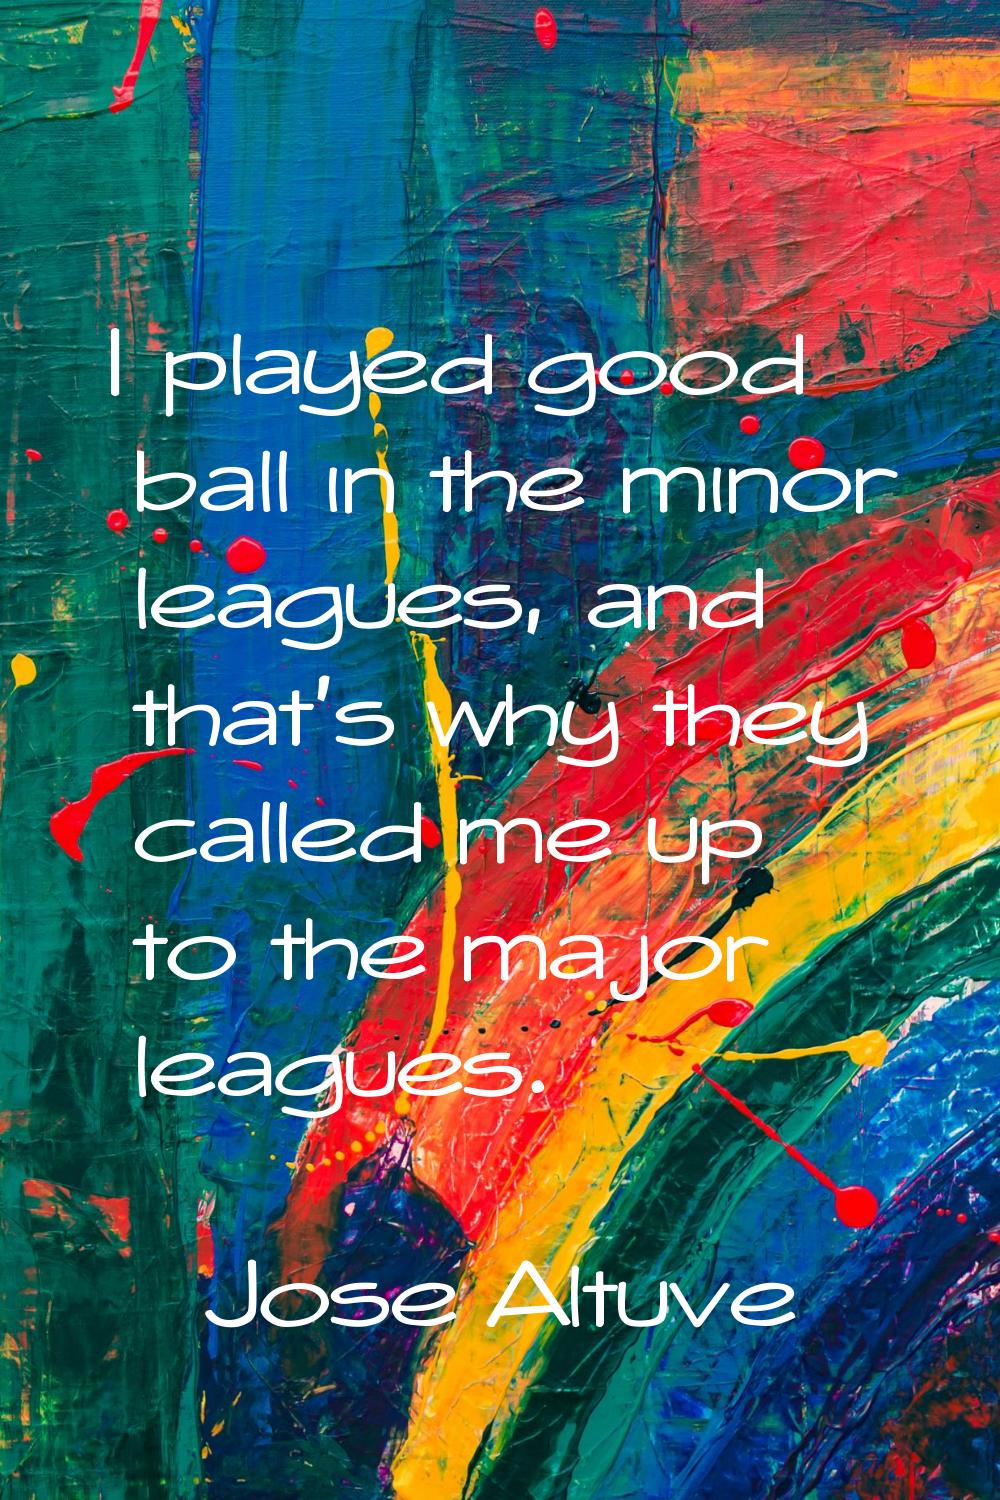 I played good ball in the minor leagues, and that's why they called me up to the major leagues.